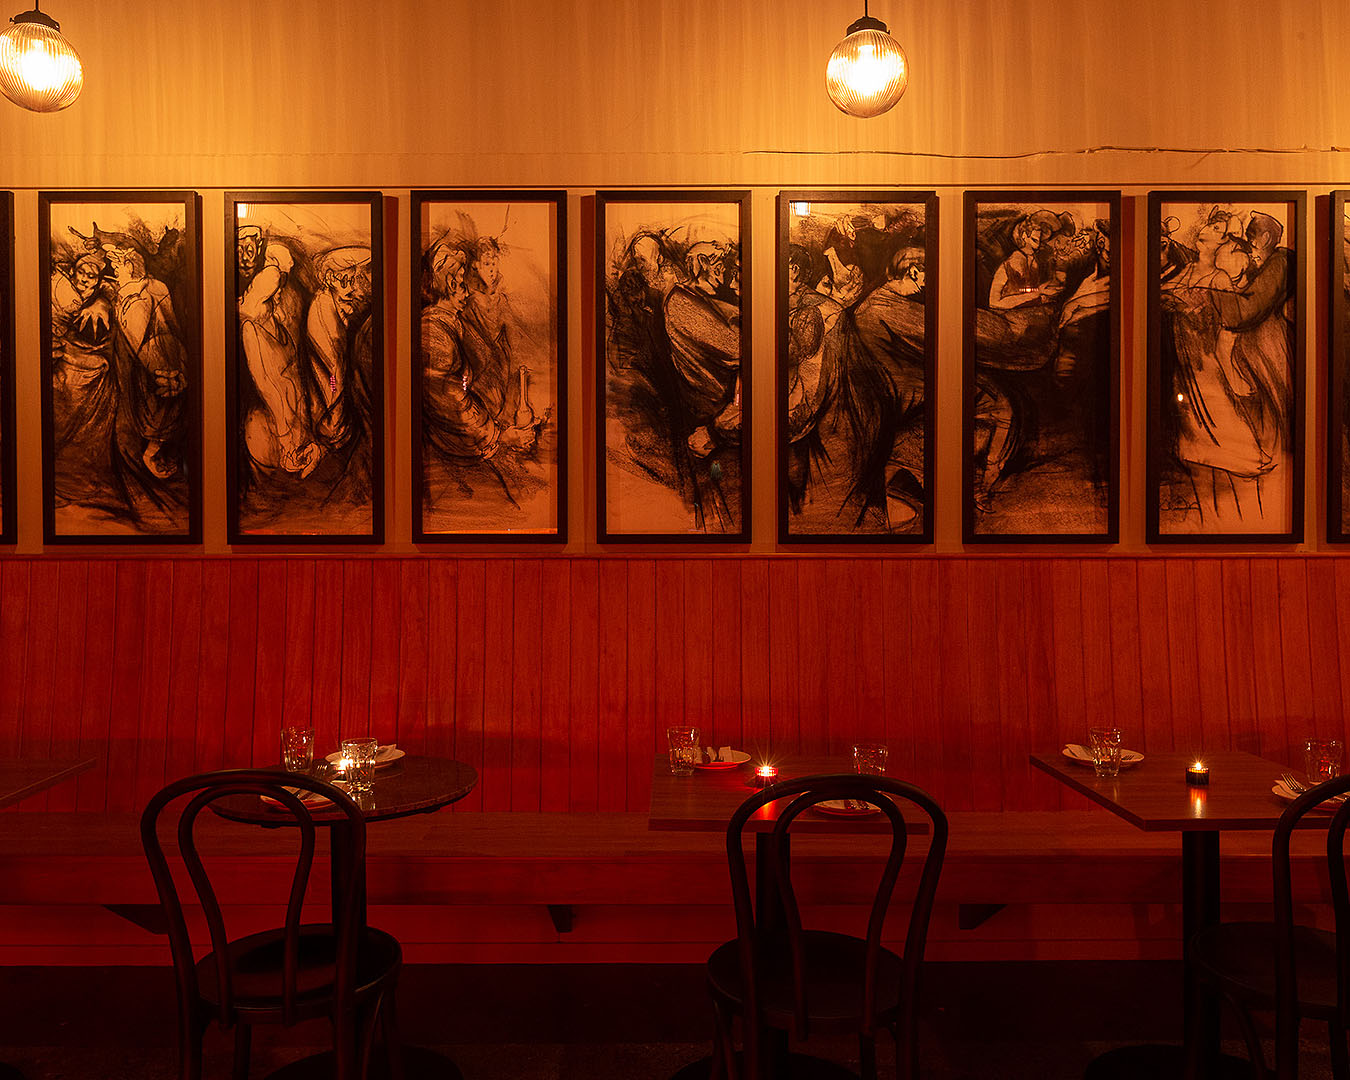 The interior at Bar Magda shows seats with impressive artwork on the wall.